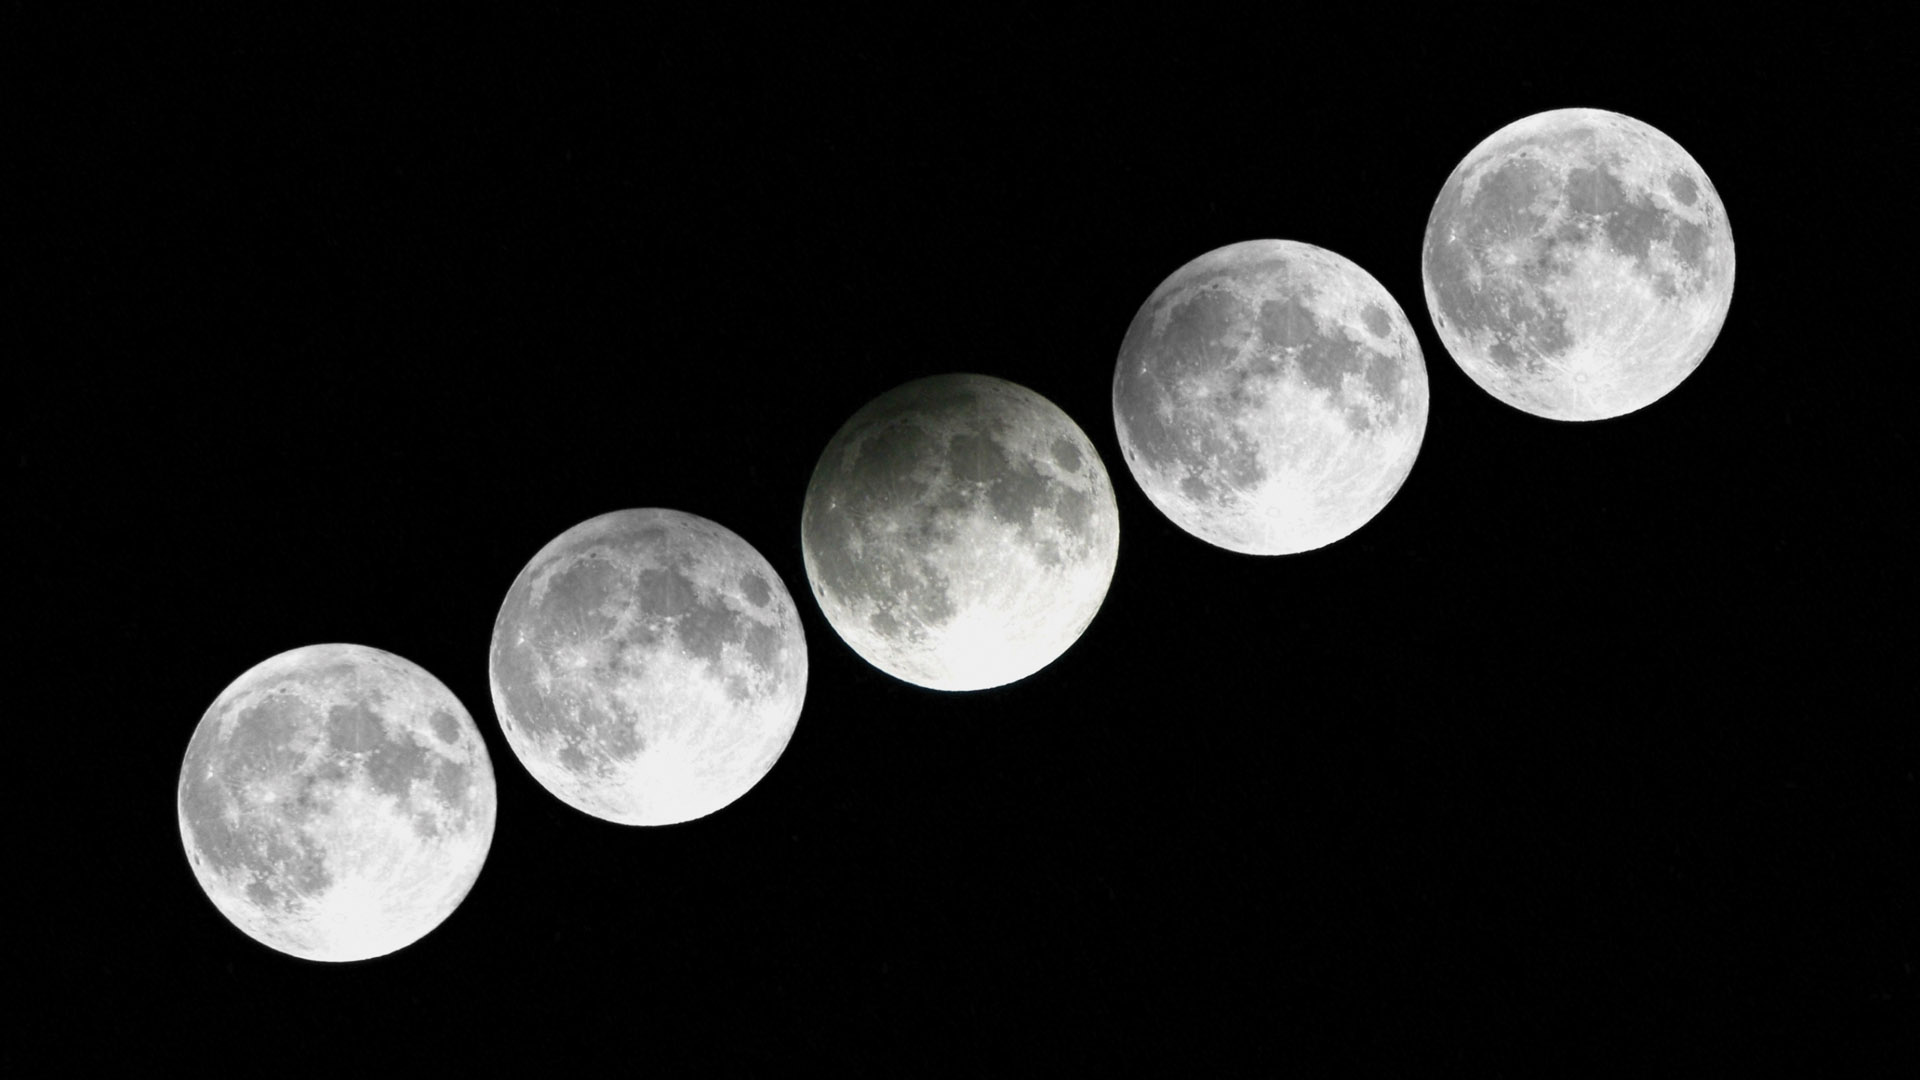 Penumbral eclipse series from 2012